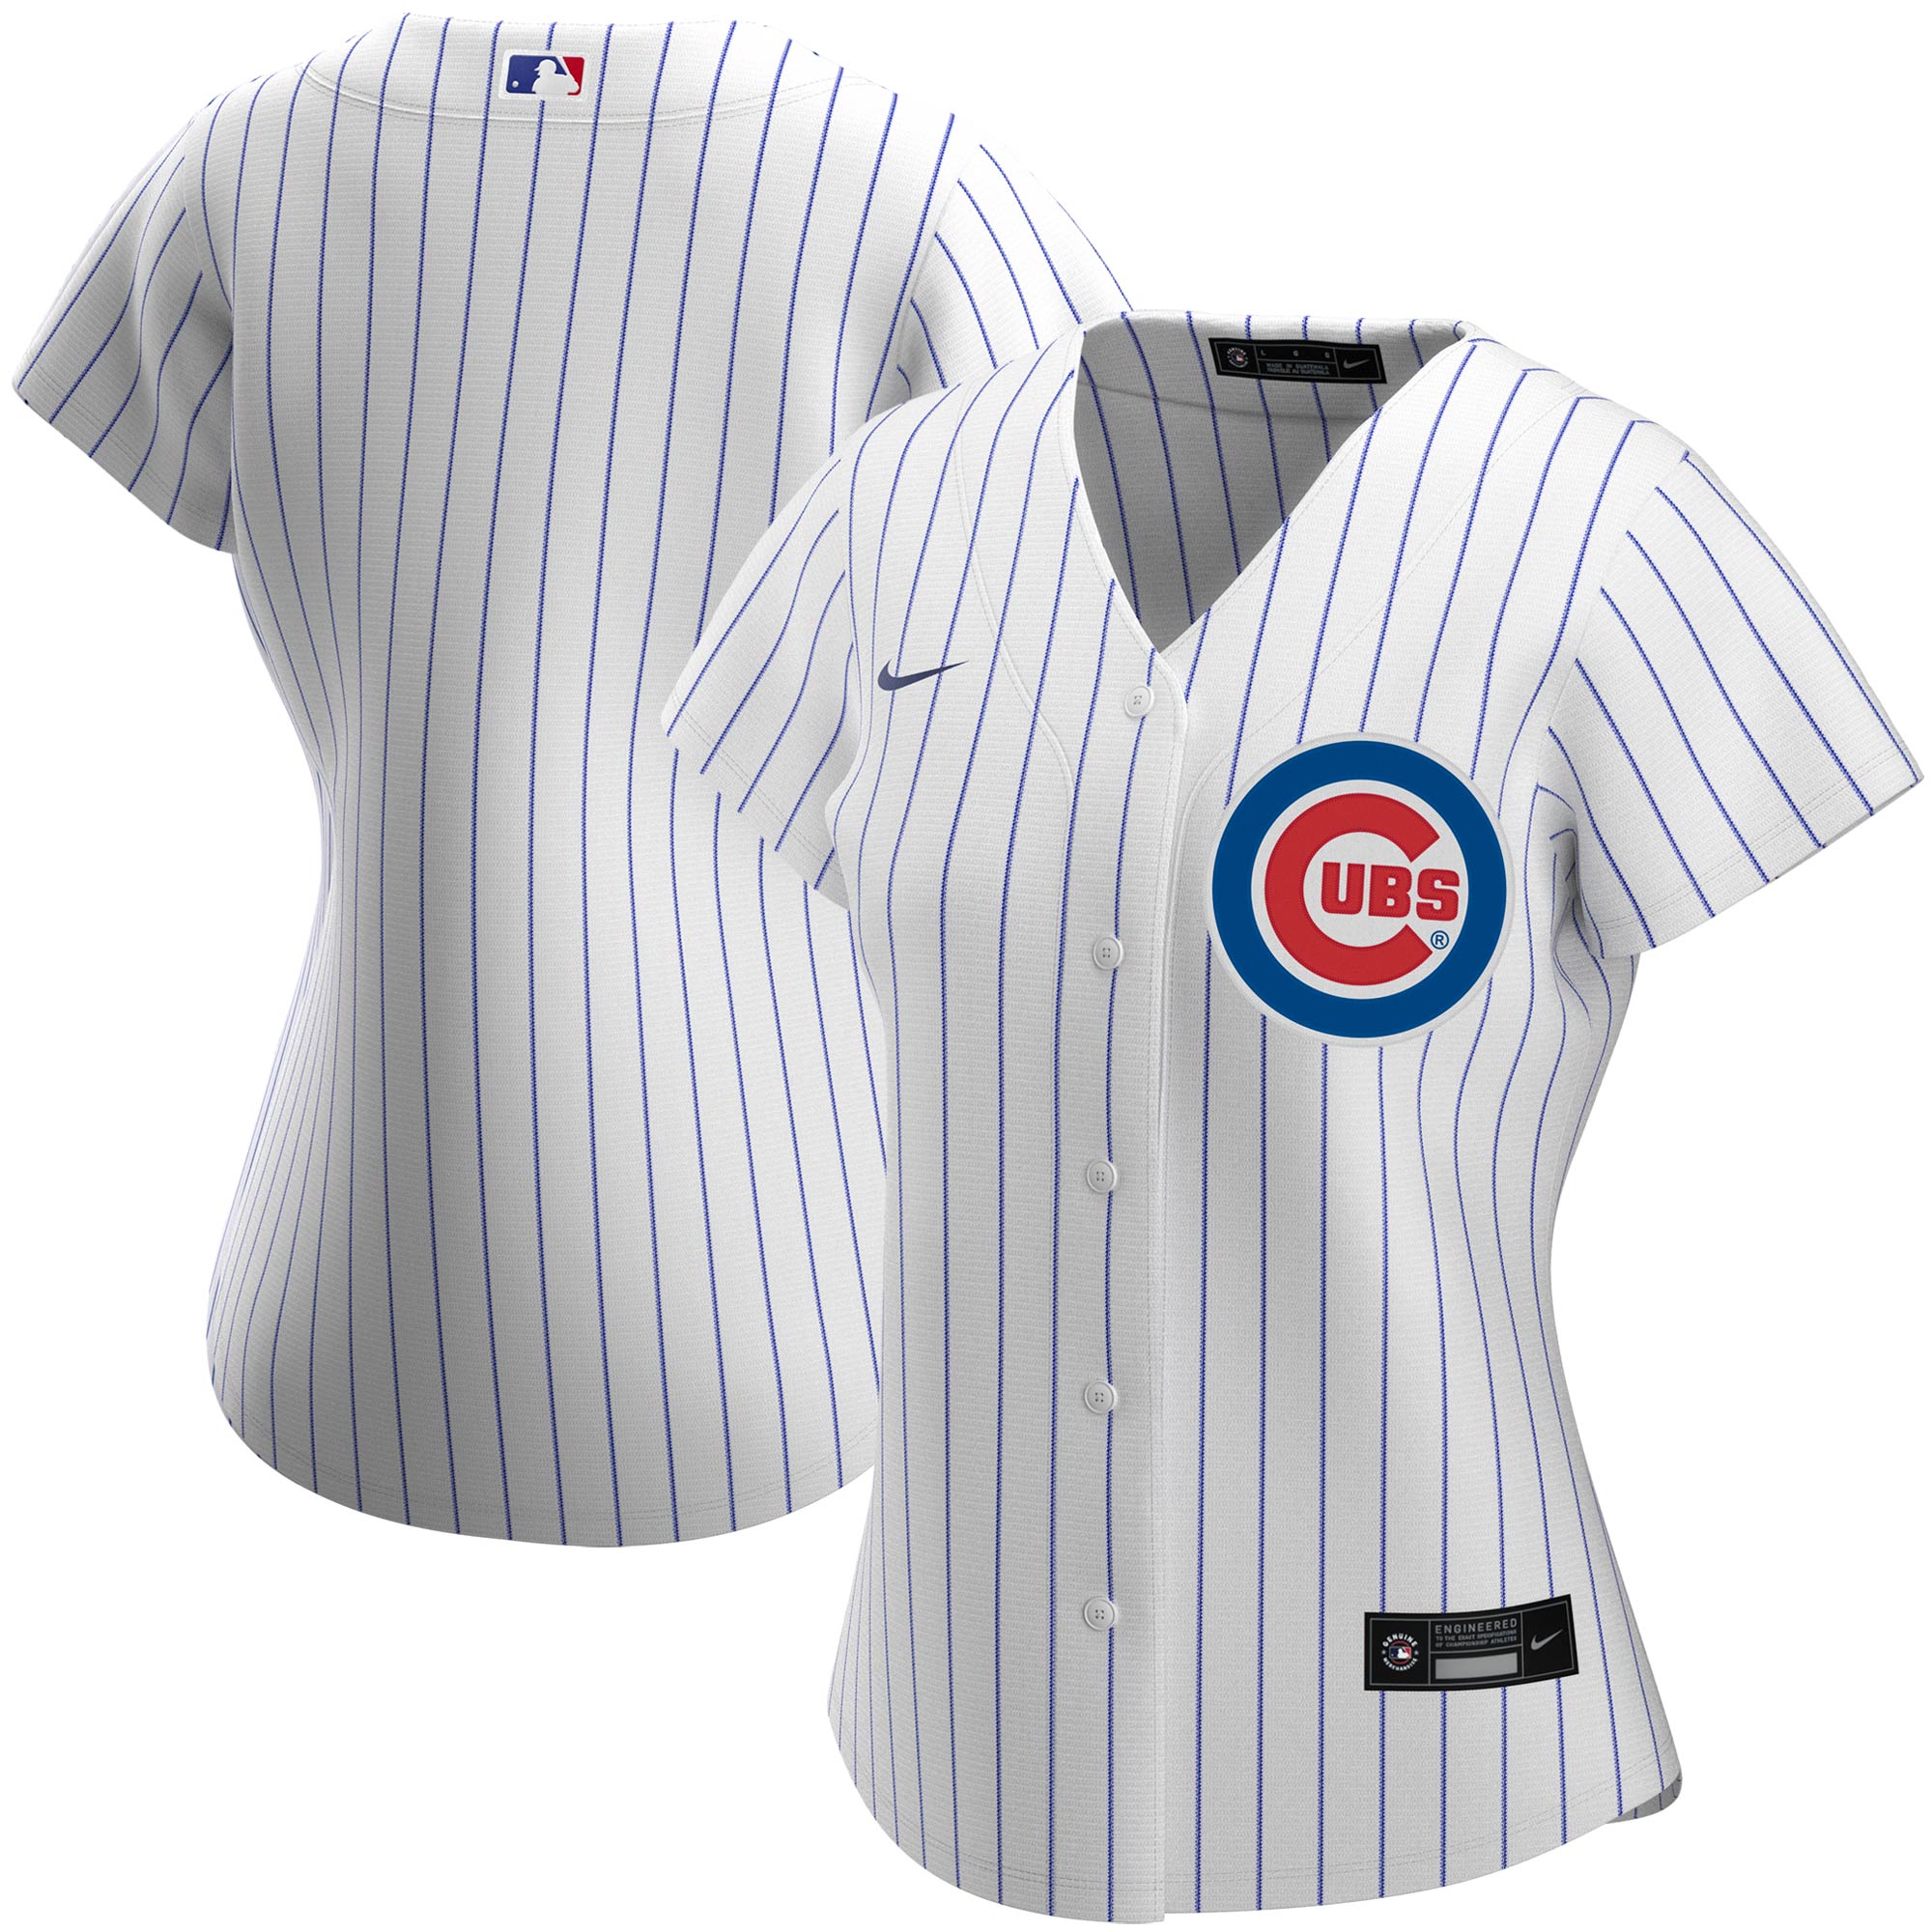 Chicago Cubs Nike Pitch Black Jersey - Clark Street Sports